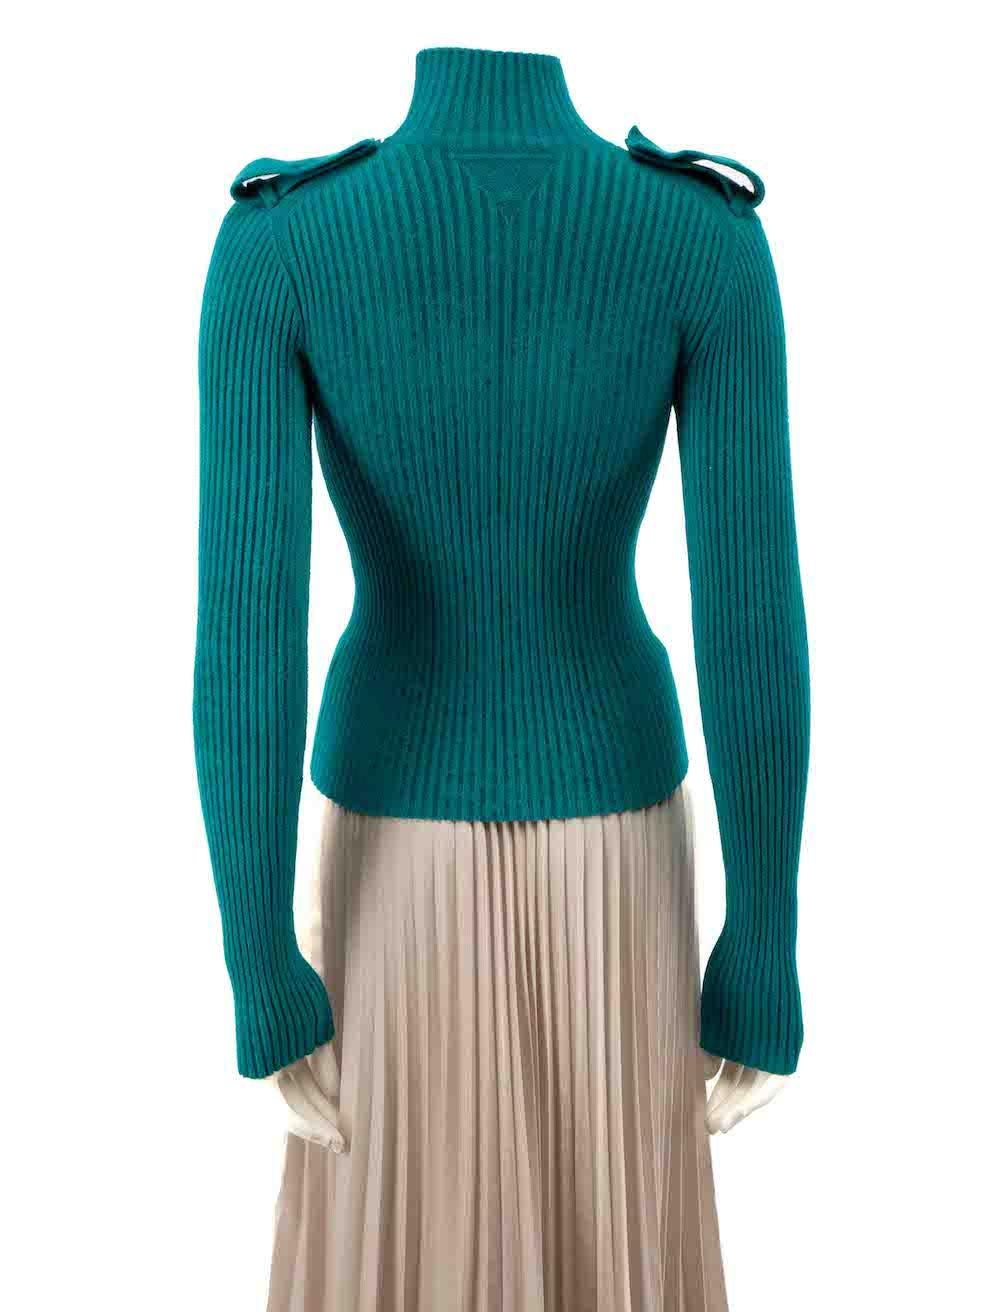 Bottega Veneta Turquoise Velour Cut Out Jumper Size S In Excellent Condition For Sale In London, GB